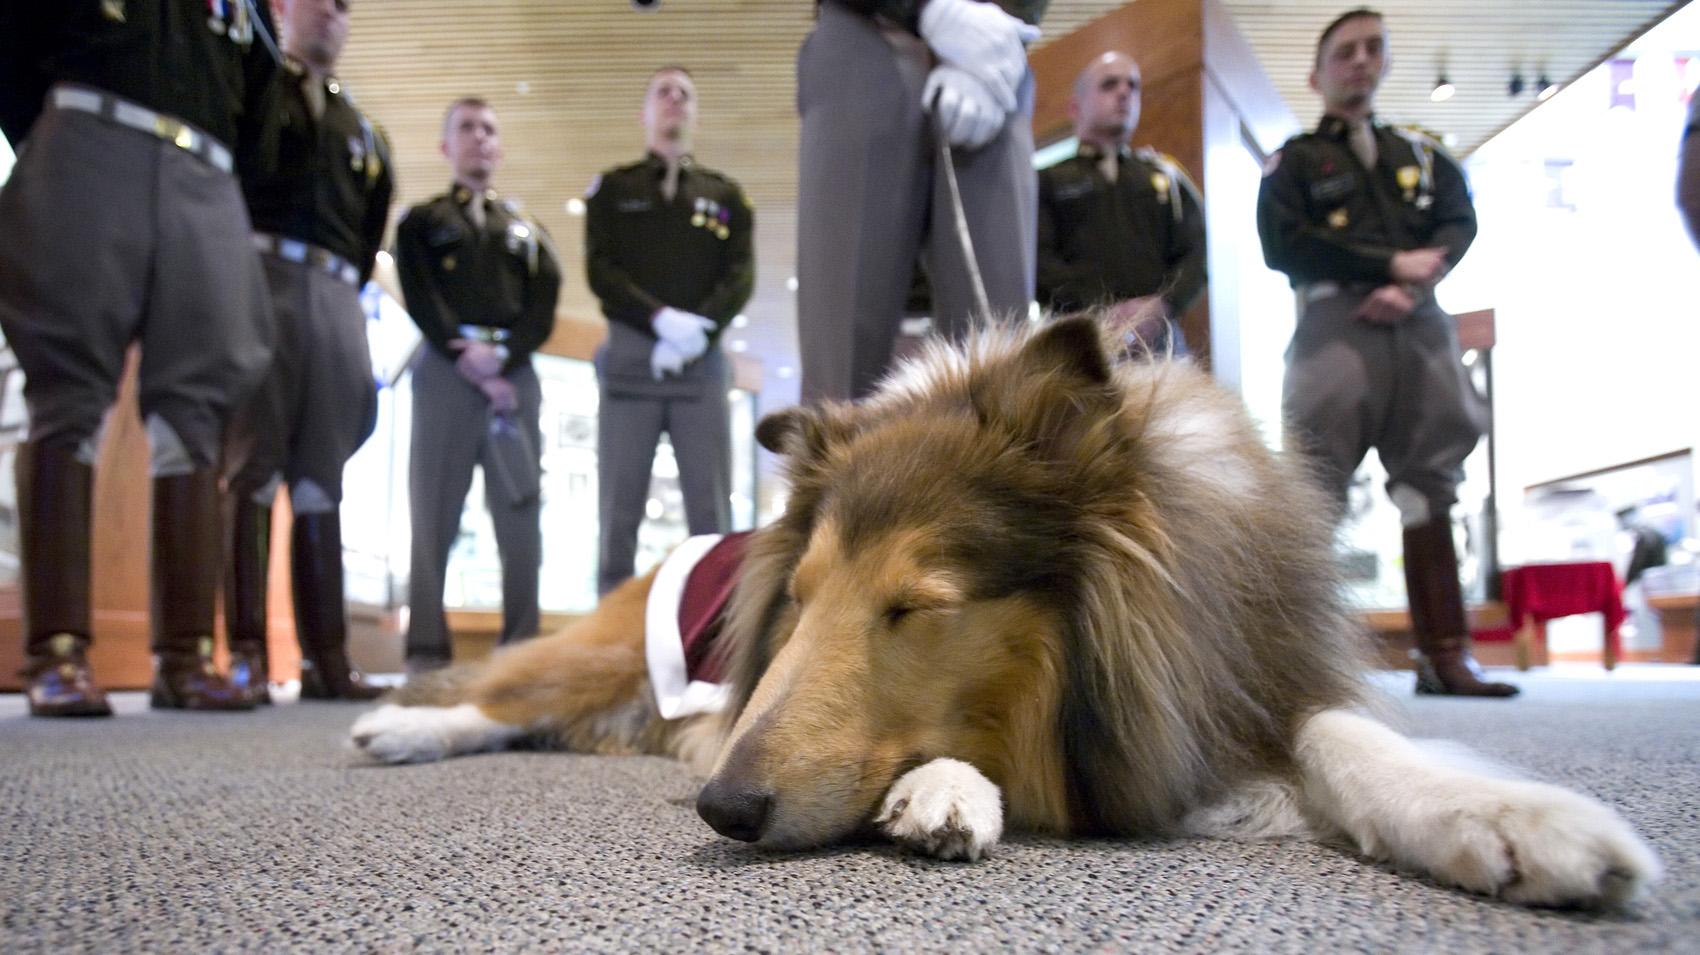 Reveille: Texas A&M Official Mascot's History and What Happens If She Barks  in Class